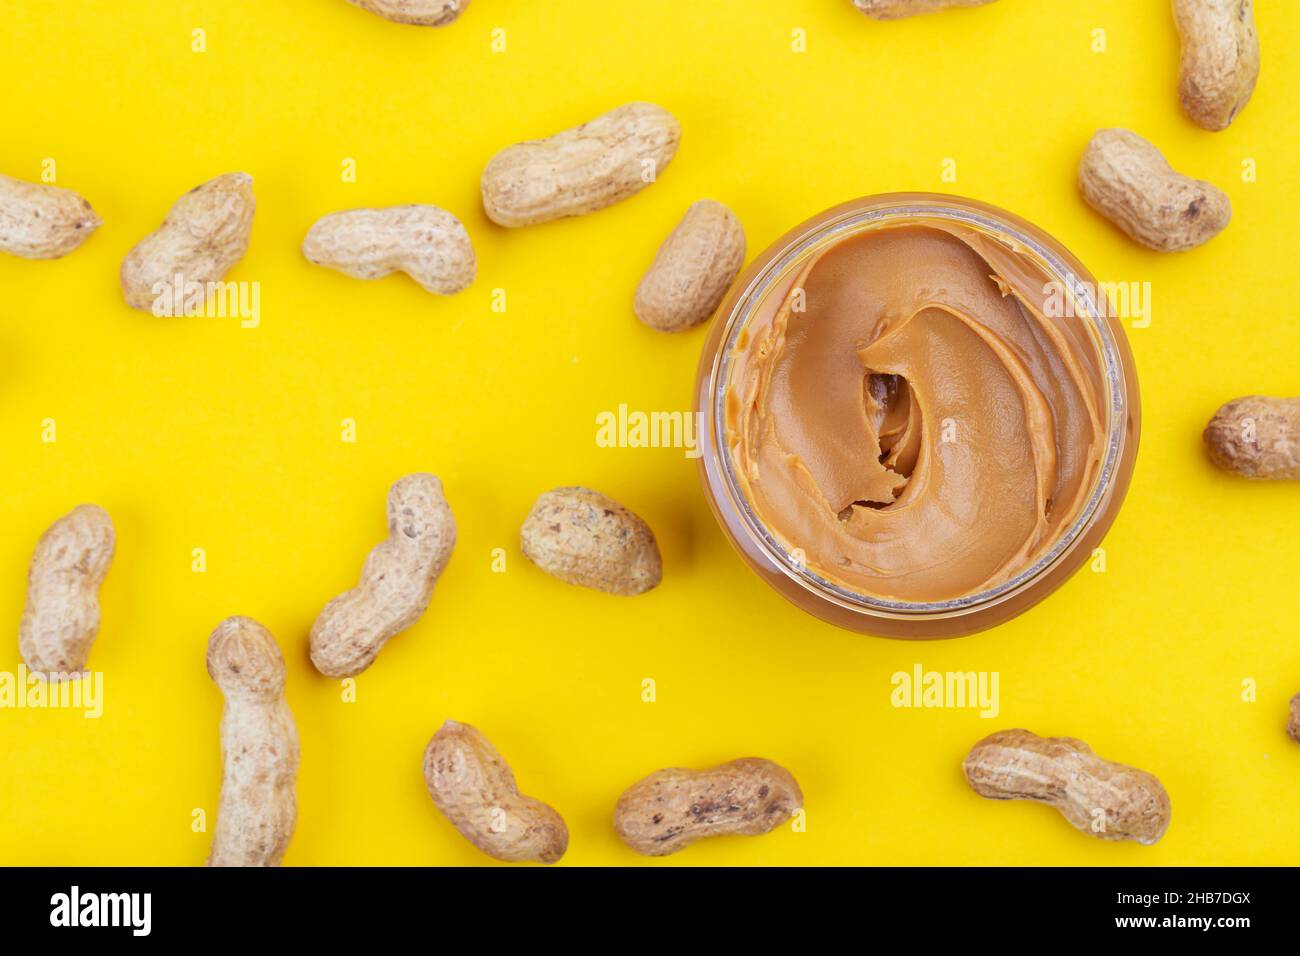 Peanut butter in a glass jar on a yellow background. Delicious and healthy breakfast. Arachis in a shell is scattered around the jar. Stock Photo